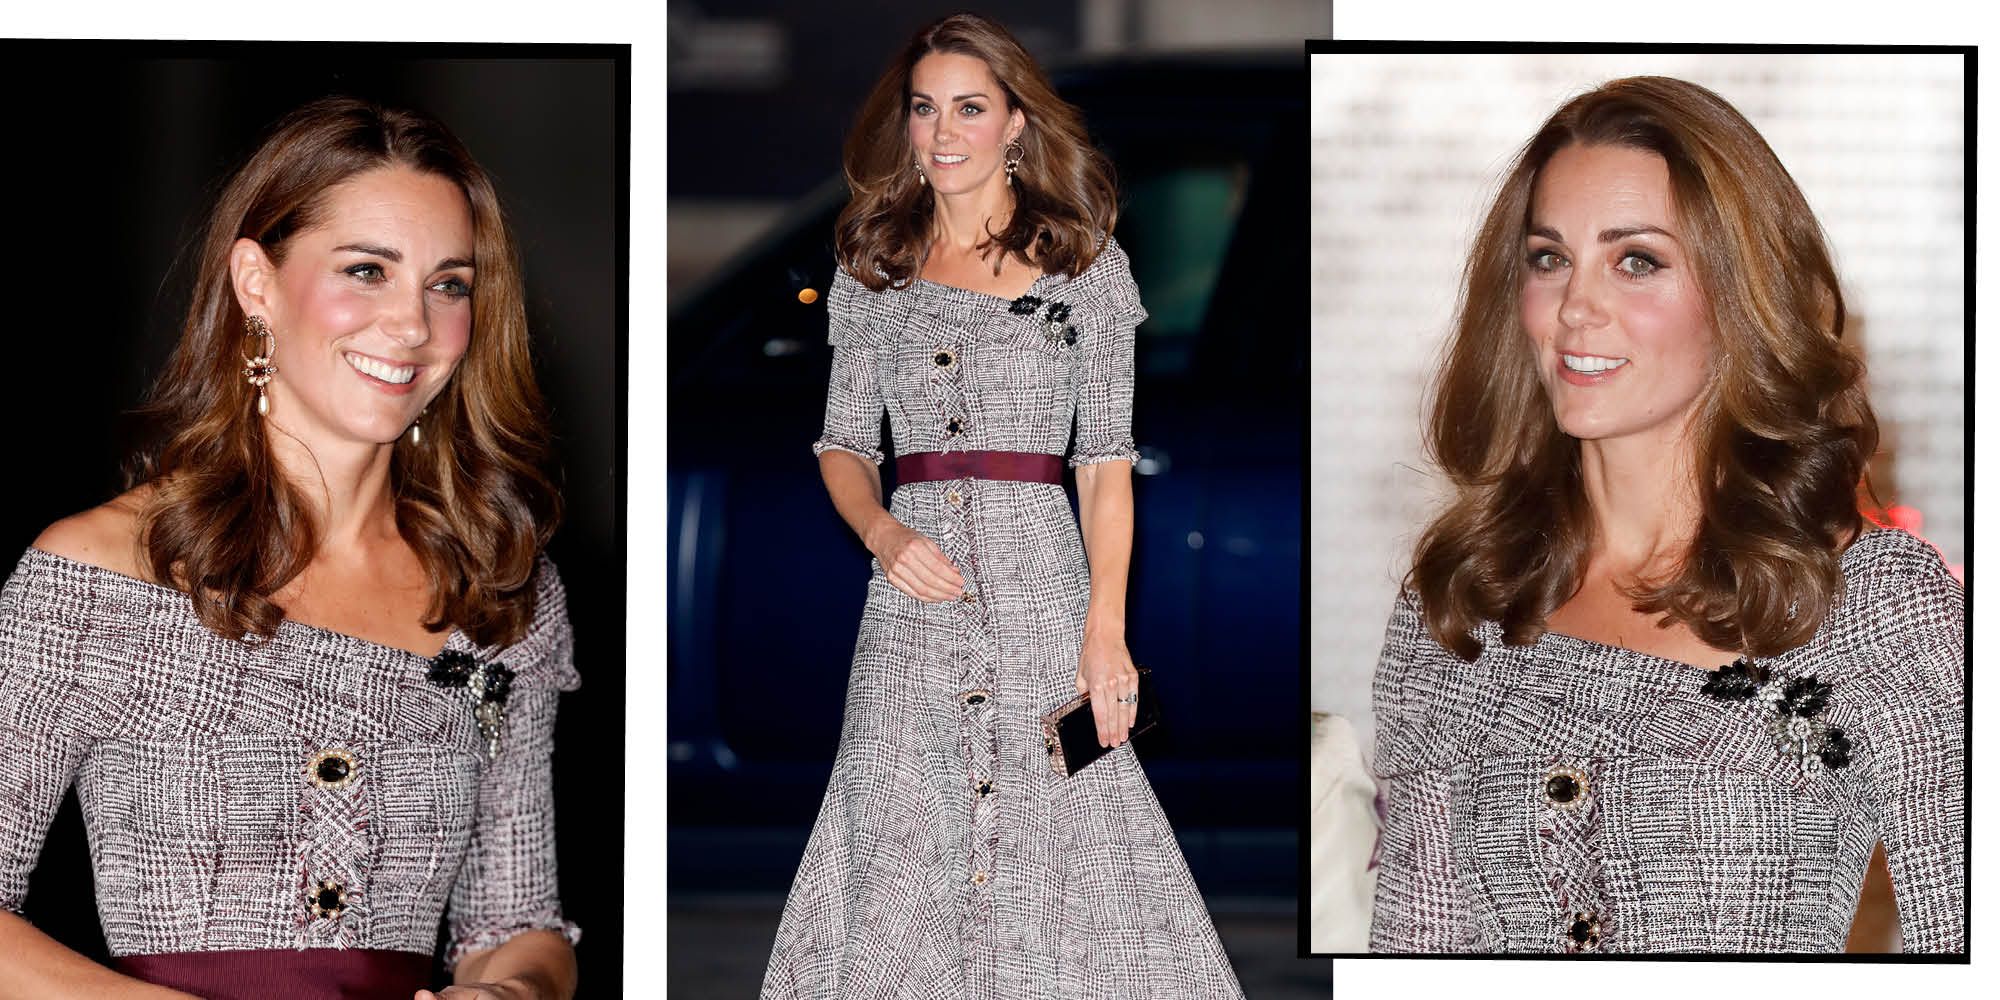 Kate Middleton Steps Out In A Cute Black Tweed Skirt Suit